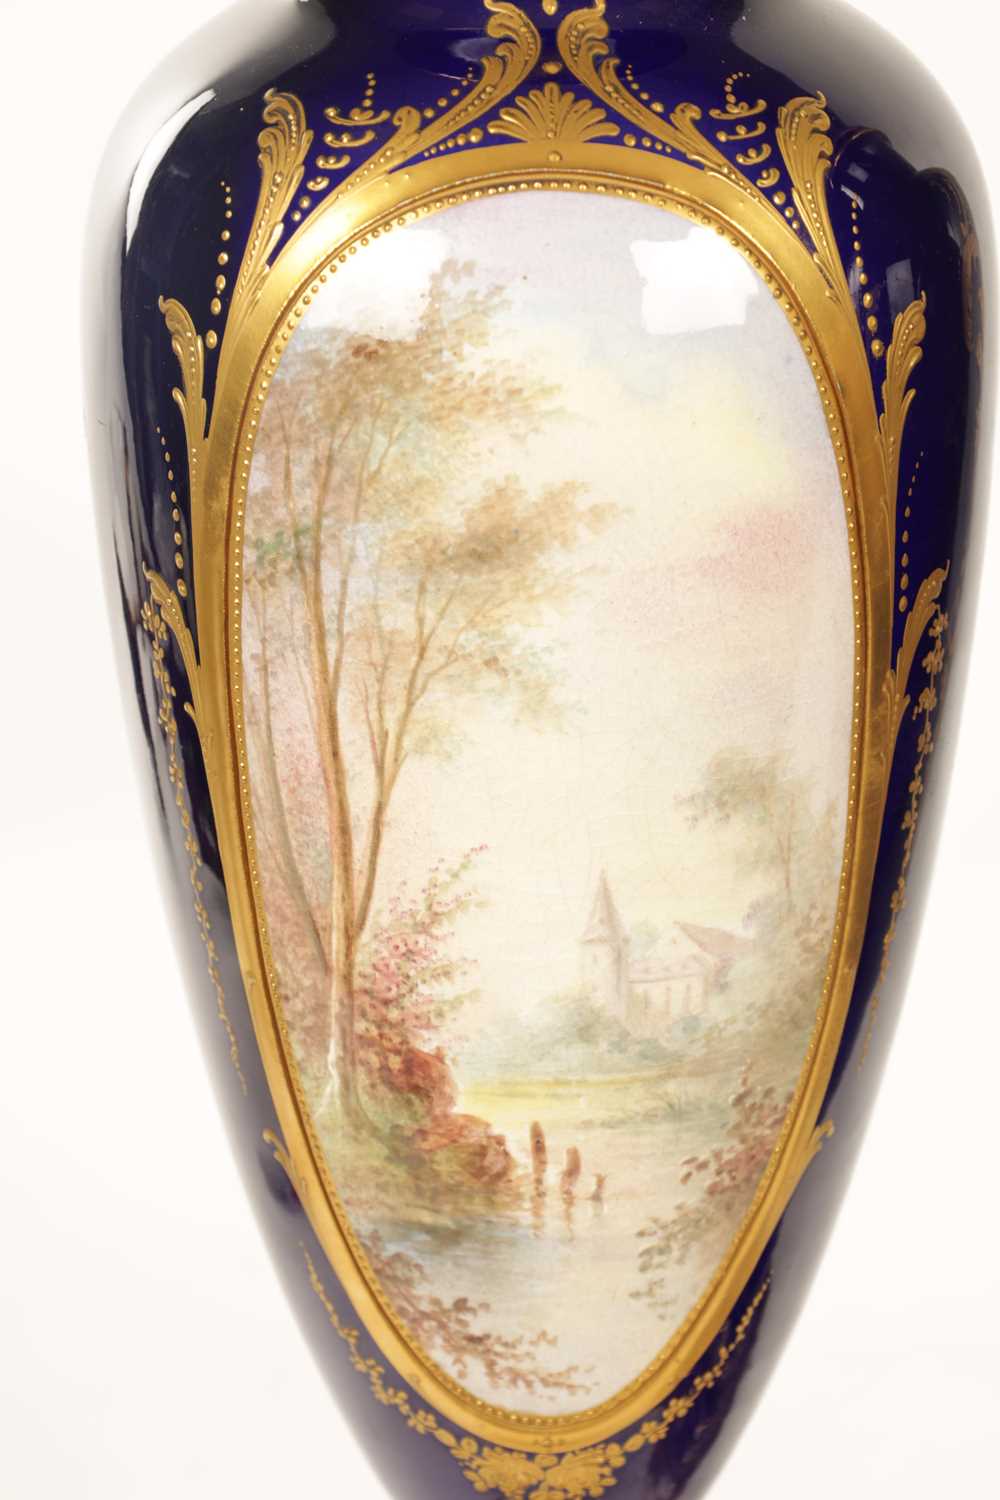 A PAIR OF LATE 19TH-CENTURY SERVES STYLE PORCELAIN LARGE CABINET VASES - Image 16 of 20